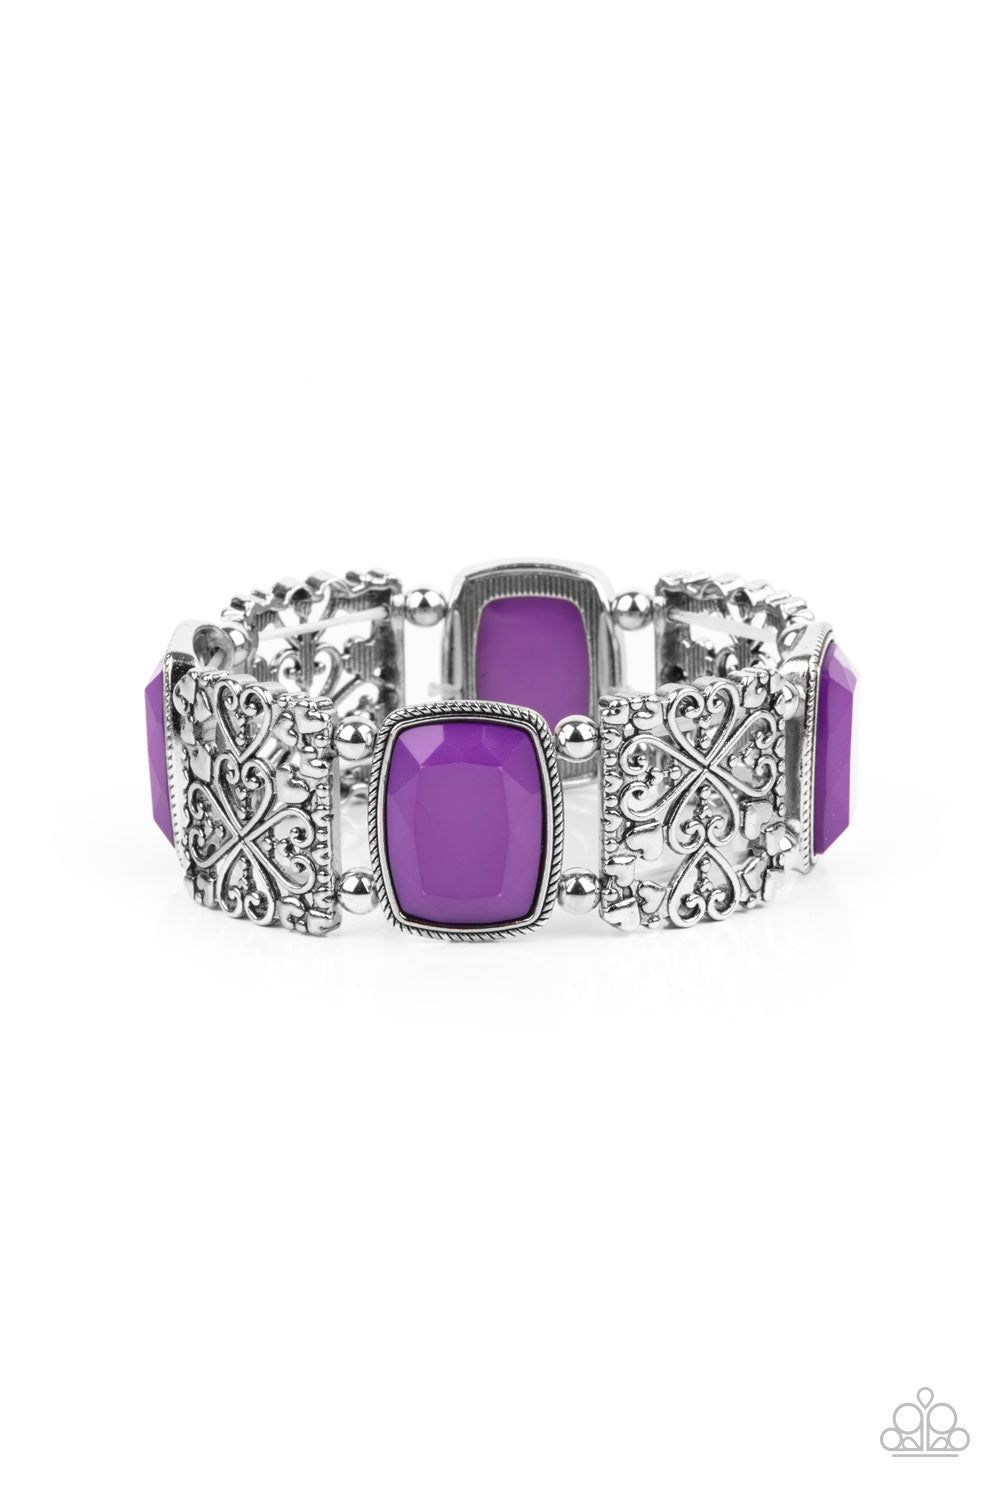 Colorful Coronation - Purple and Silver - Stretchy Bracelet - Paparazzi Accessories - 
Infused with dainty silver heart accents, whimsically filled silver filigree frames and faceted Amethyst Orchid beads are threaded along stretchy bands around the wrist for a colorful flair. Sold as one individual bracelet.
